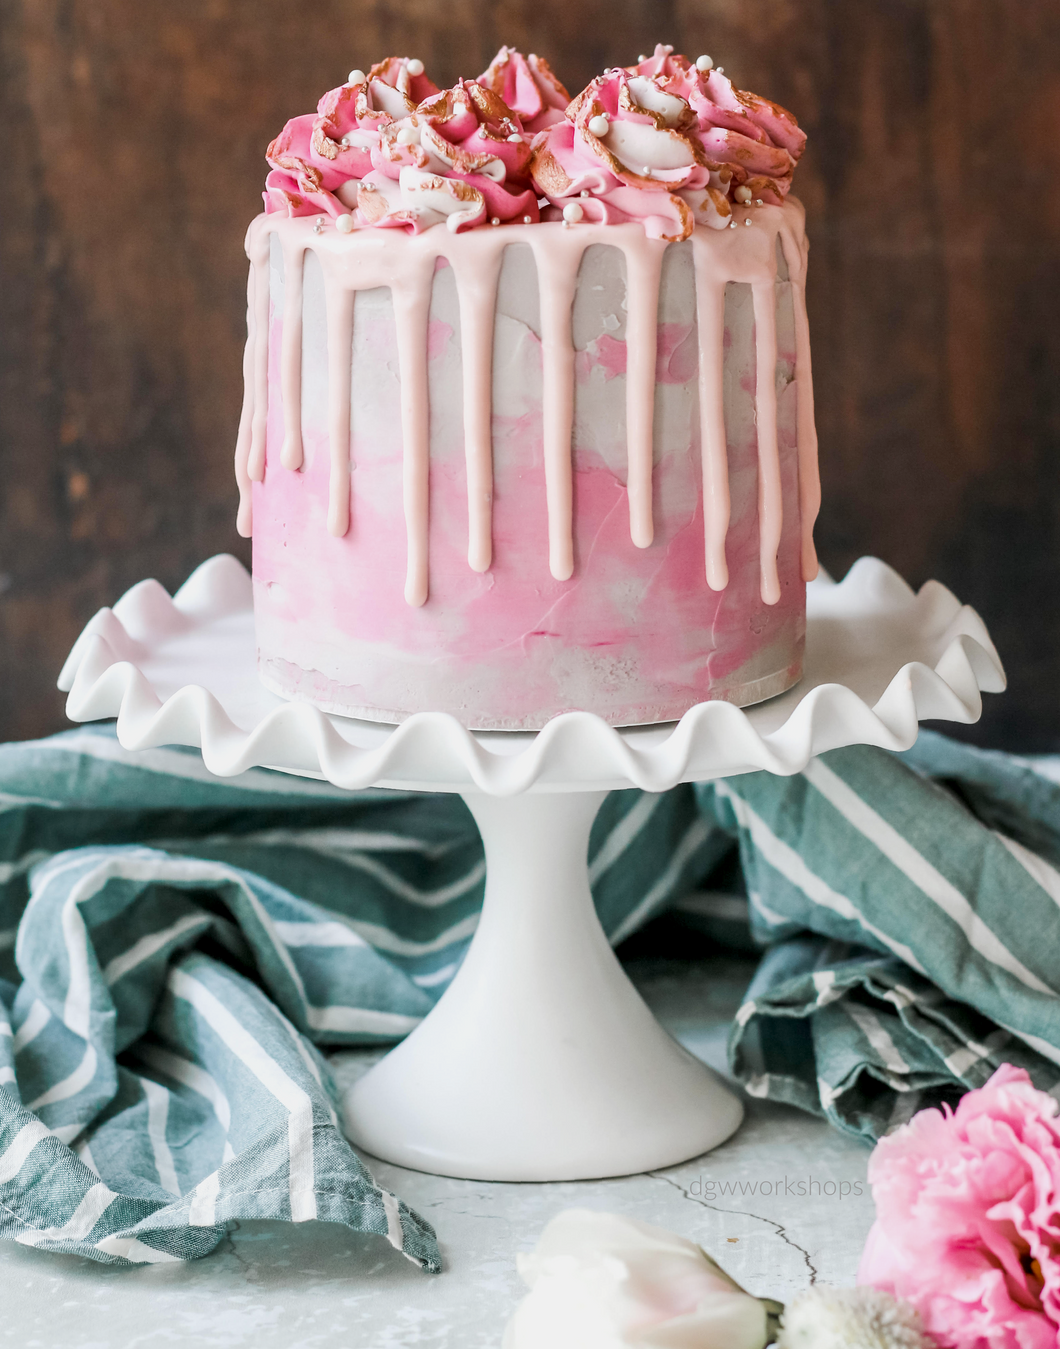 Hands-on Raspberry White Chocolate Cake with Toasted Coconut Cream Filling and Low Sugar Swiss Meringue Buttercream